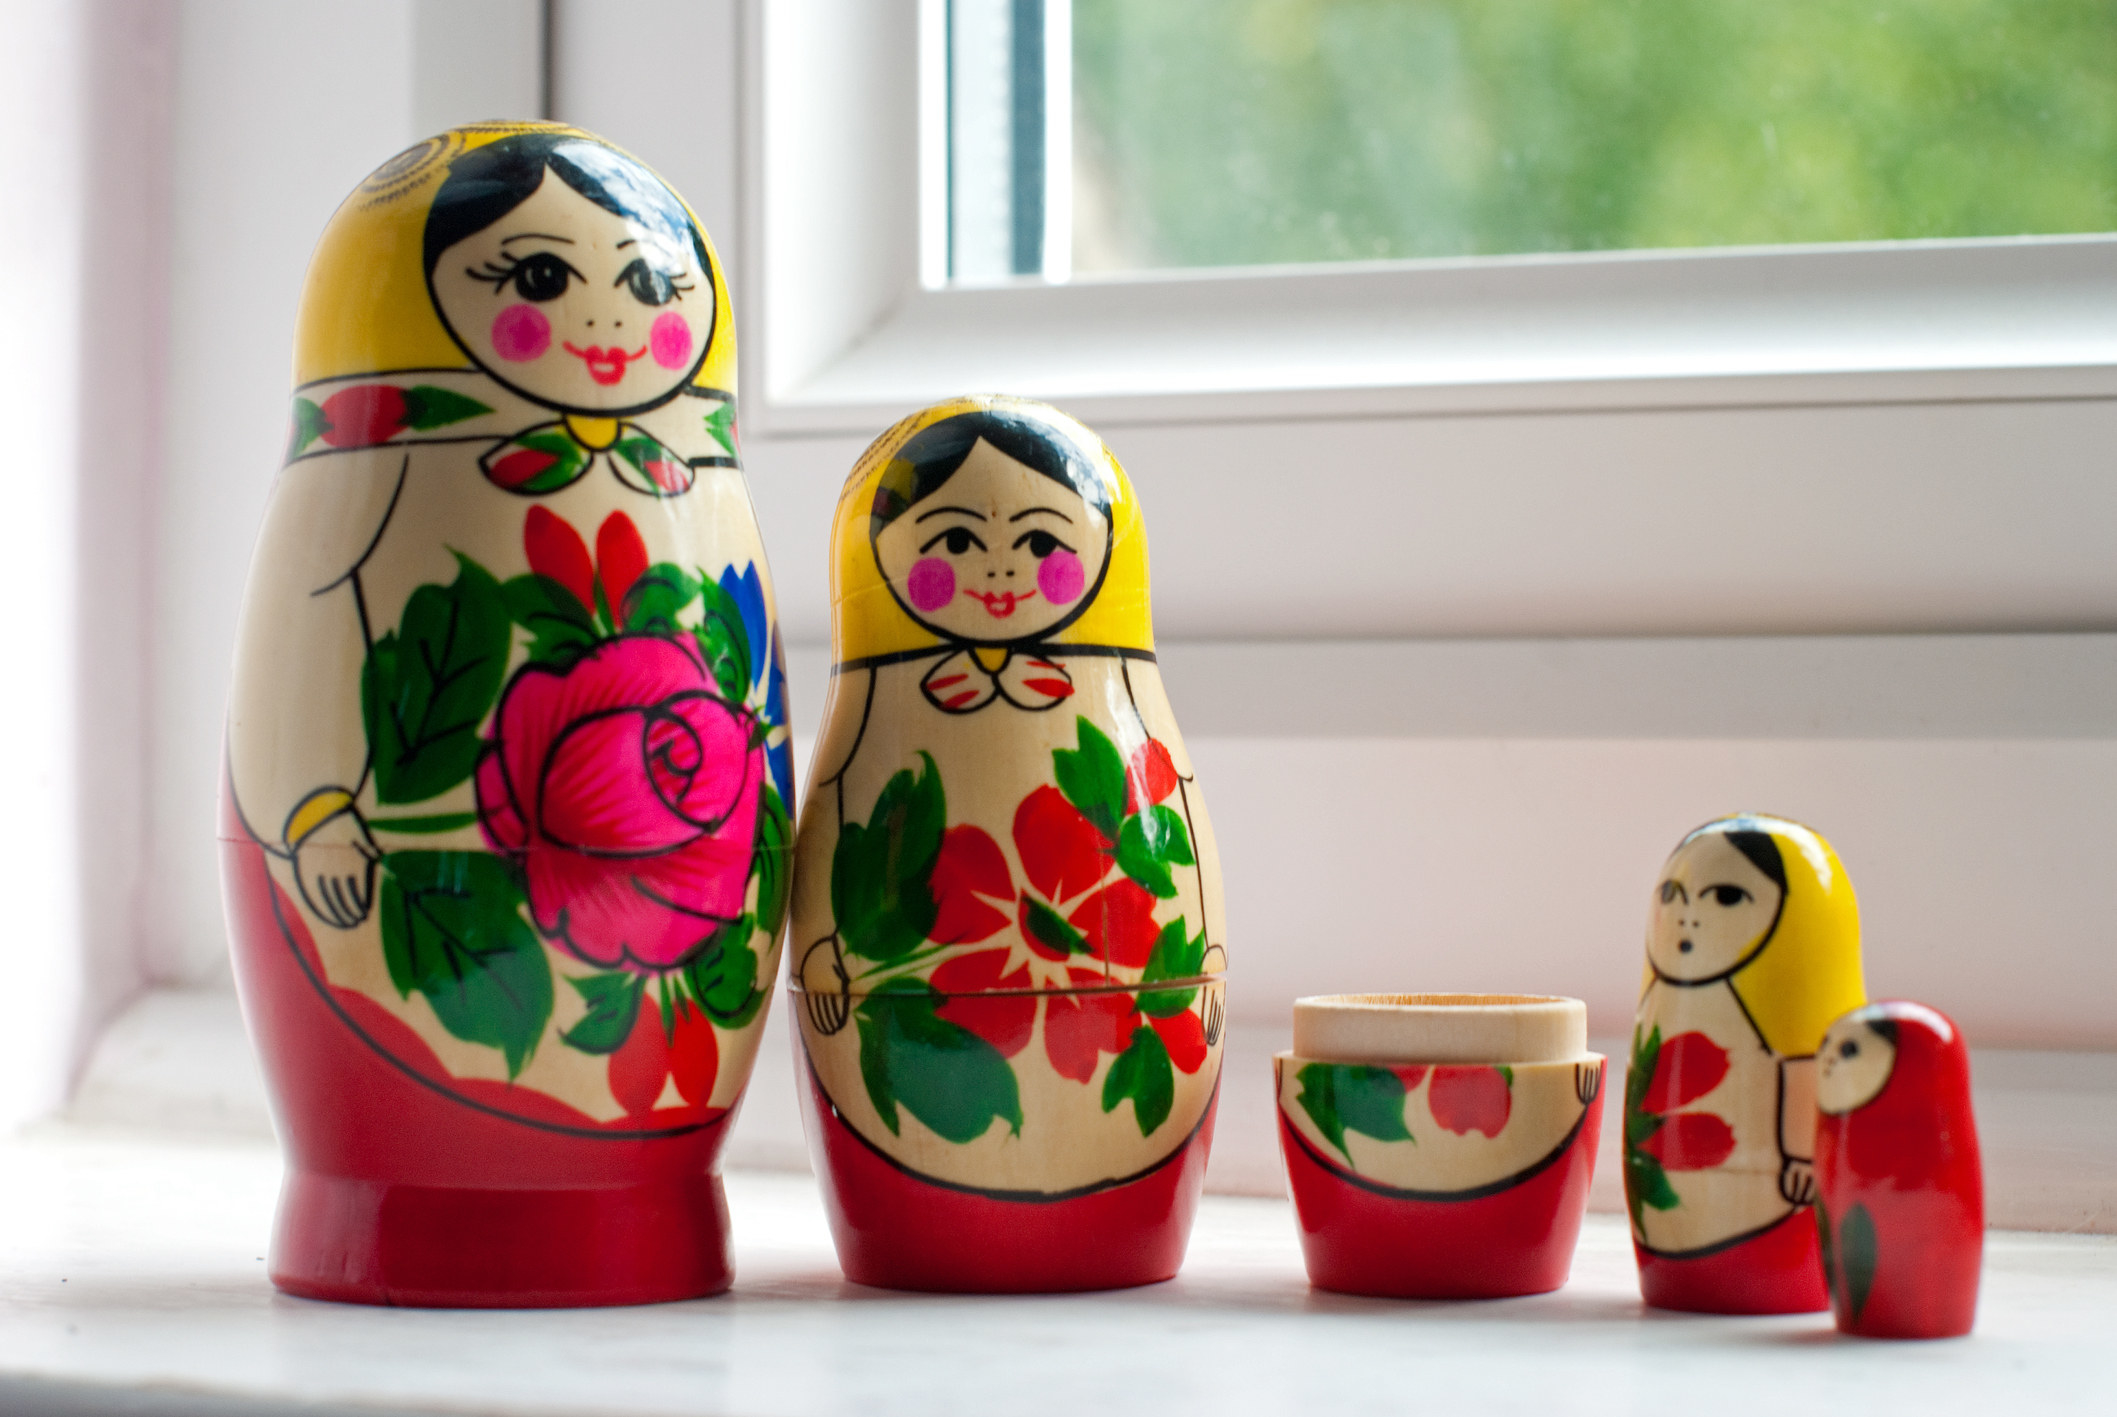 Russian dolls of different sizes